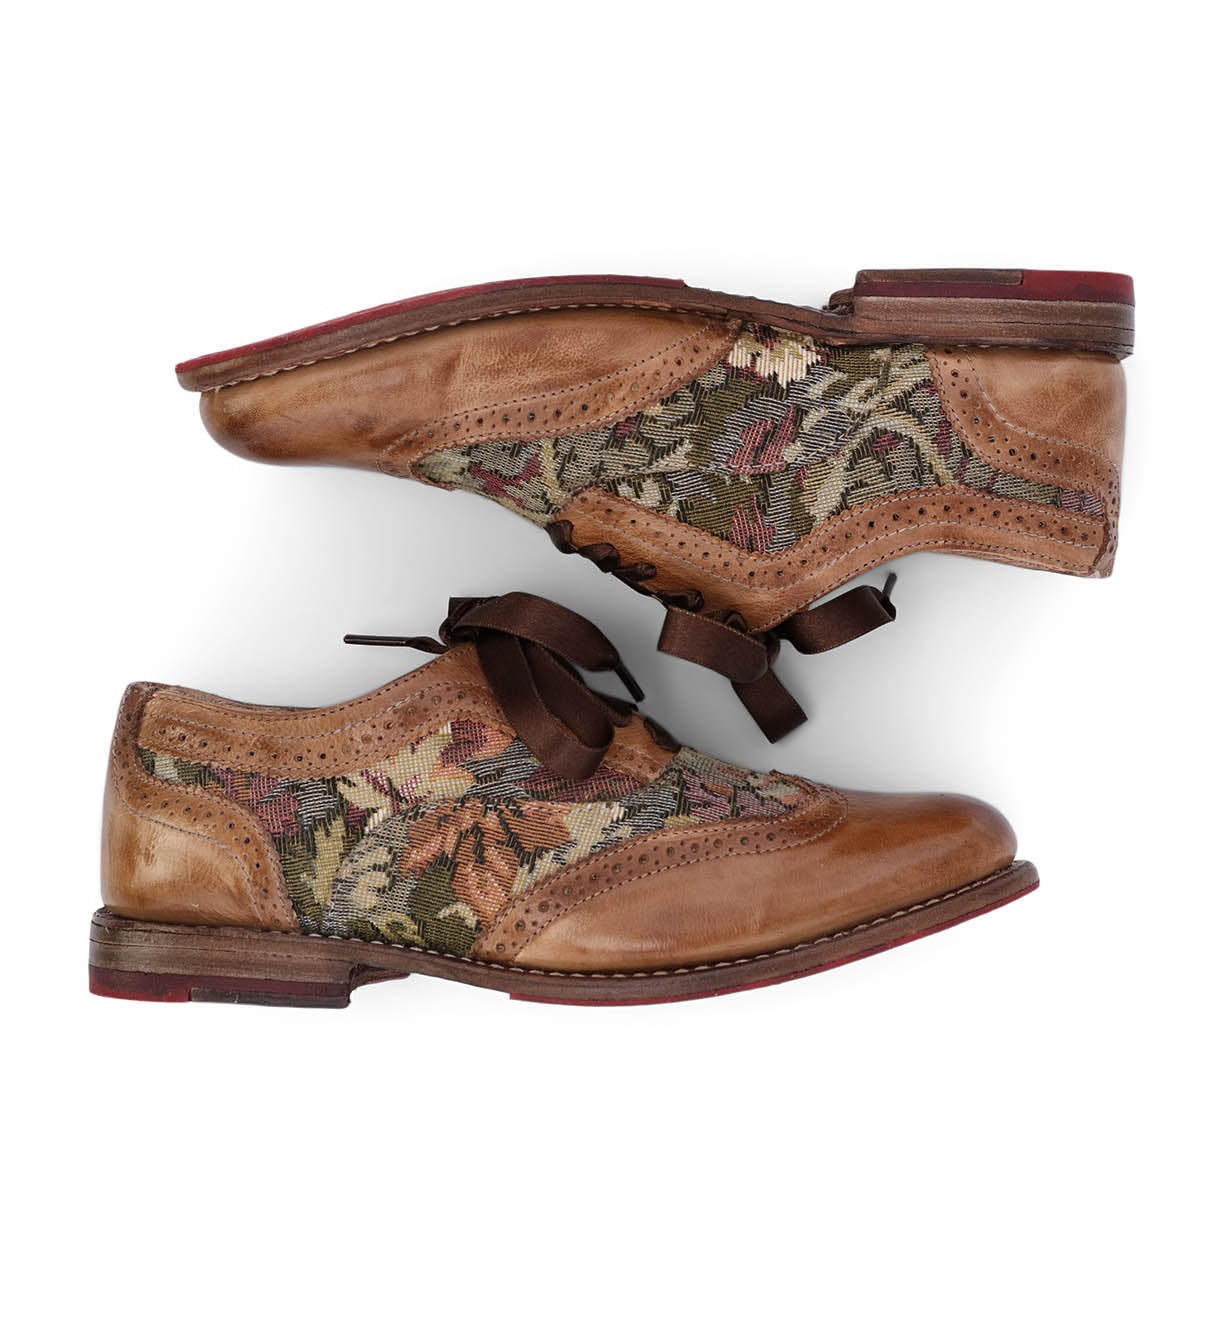 A comfortable pair of Oak Tree Farms men's leather wingtip oxford shoes with a floral pattern, perfect addition to any wardrobe.